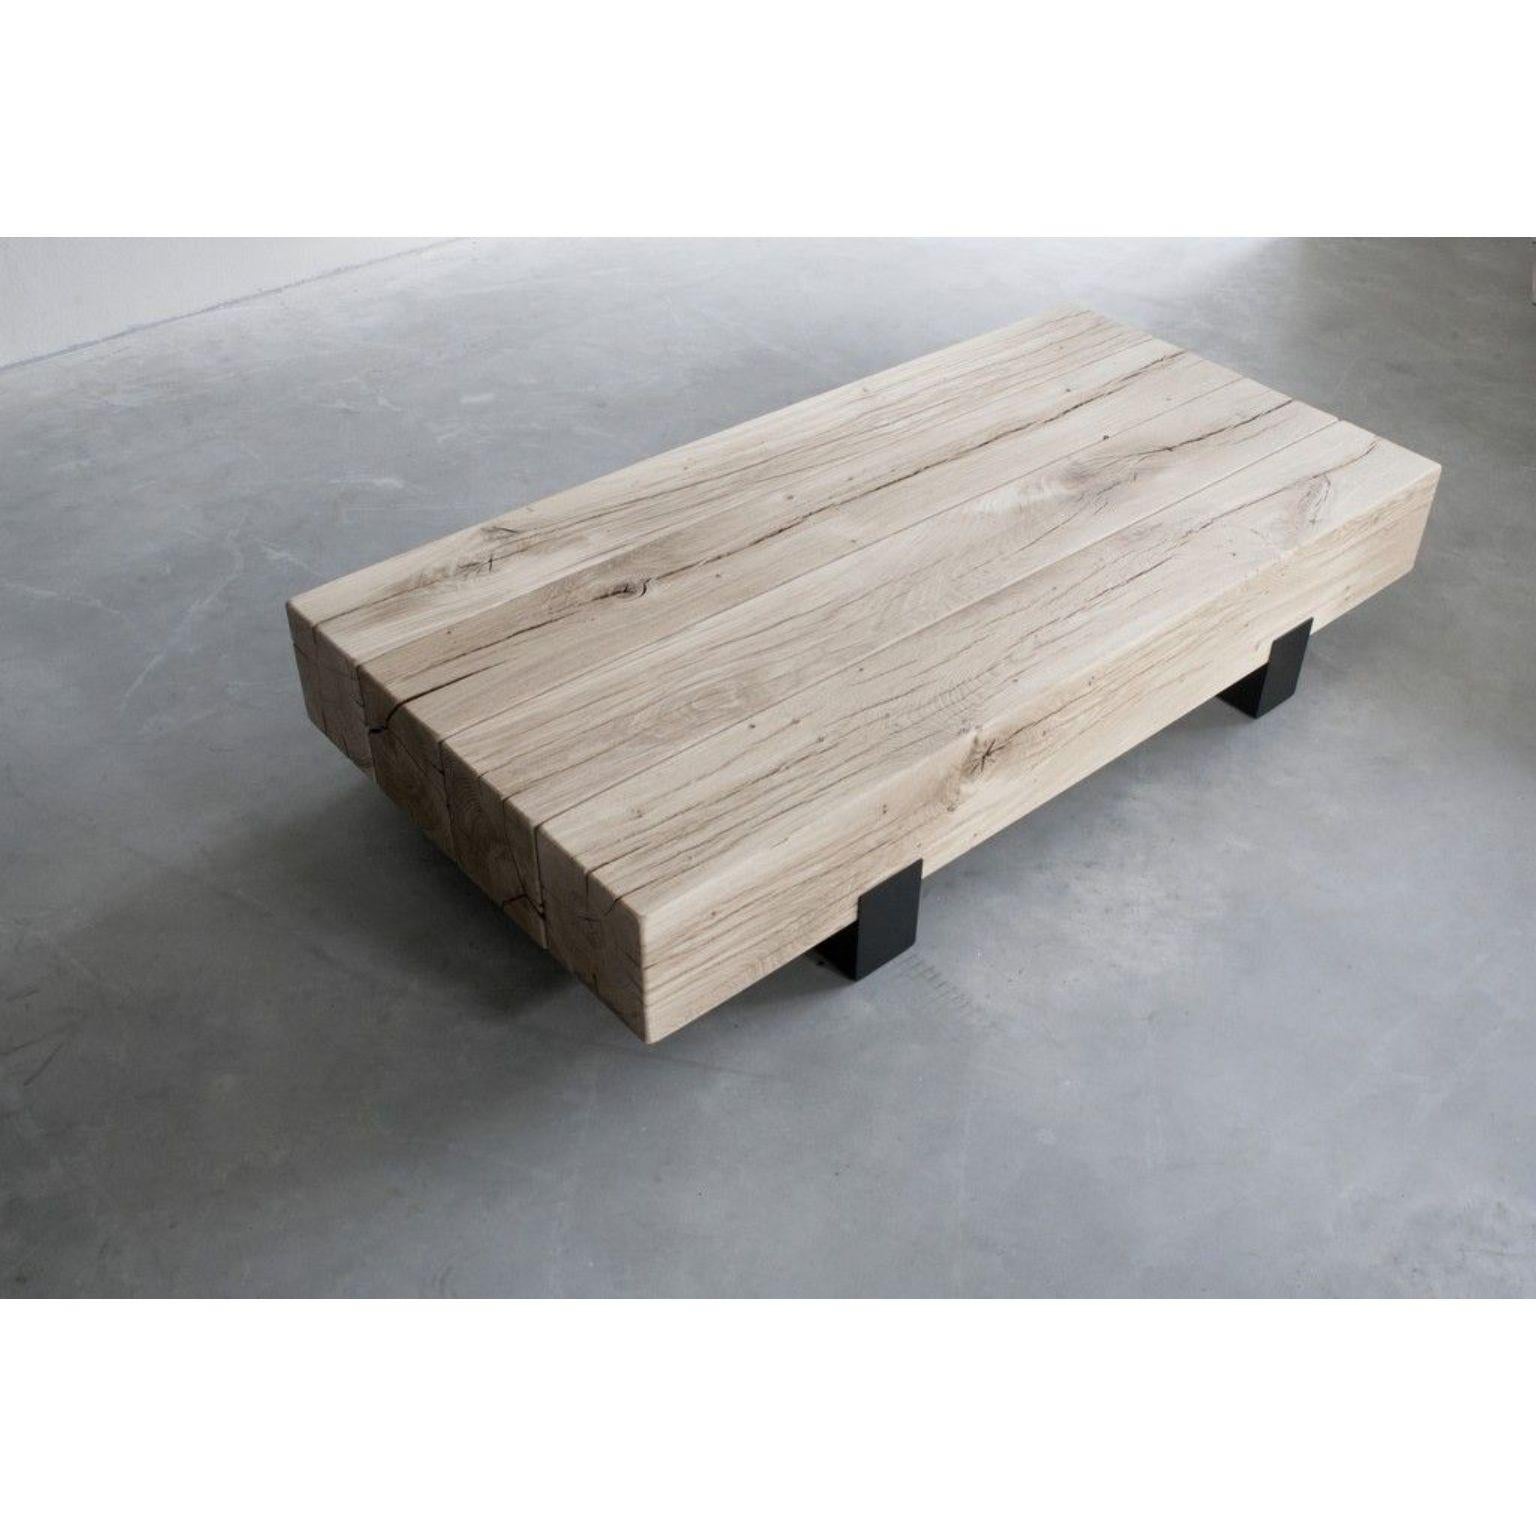 Beam rectangular coffee table by Van Rossum.
Dimensions: D100 x W127 x H28 cm
Materials: Oak, steel.

The wood is available in all standard Van Rossum colors, or in a matching finish to customer’s own sample.
The steel is available in four